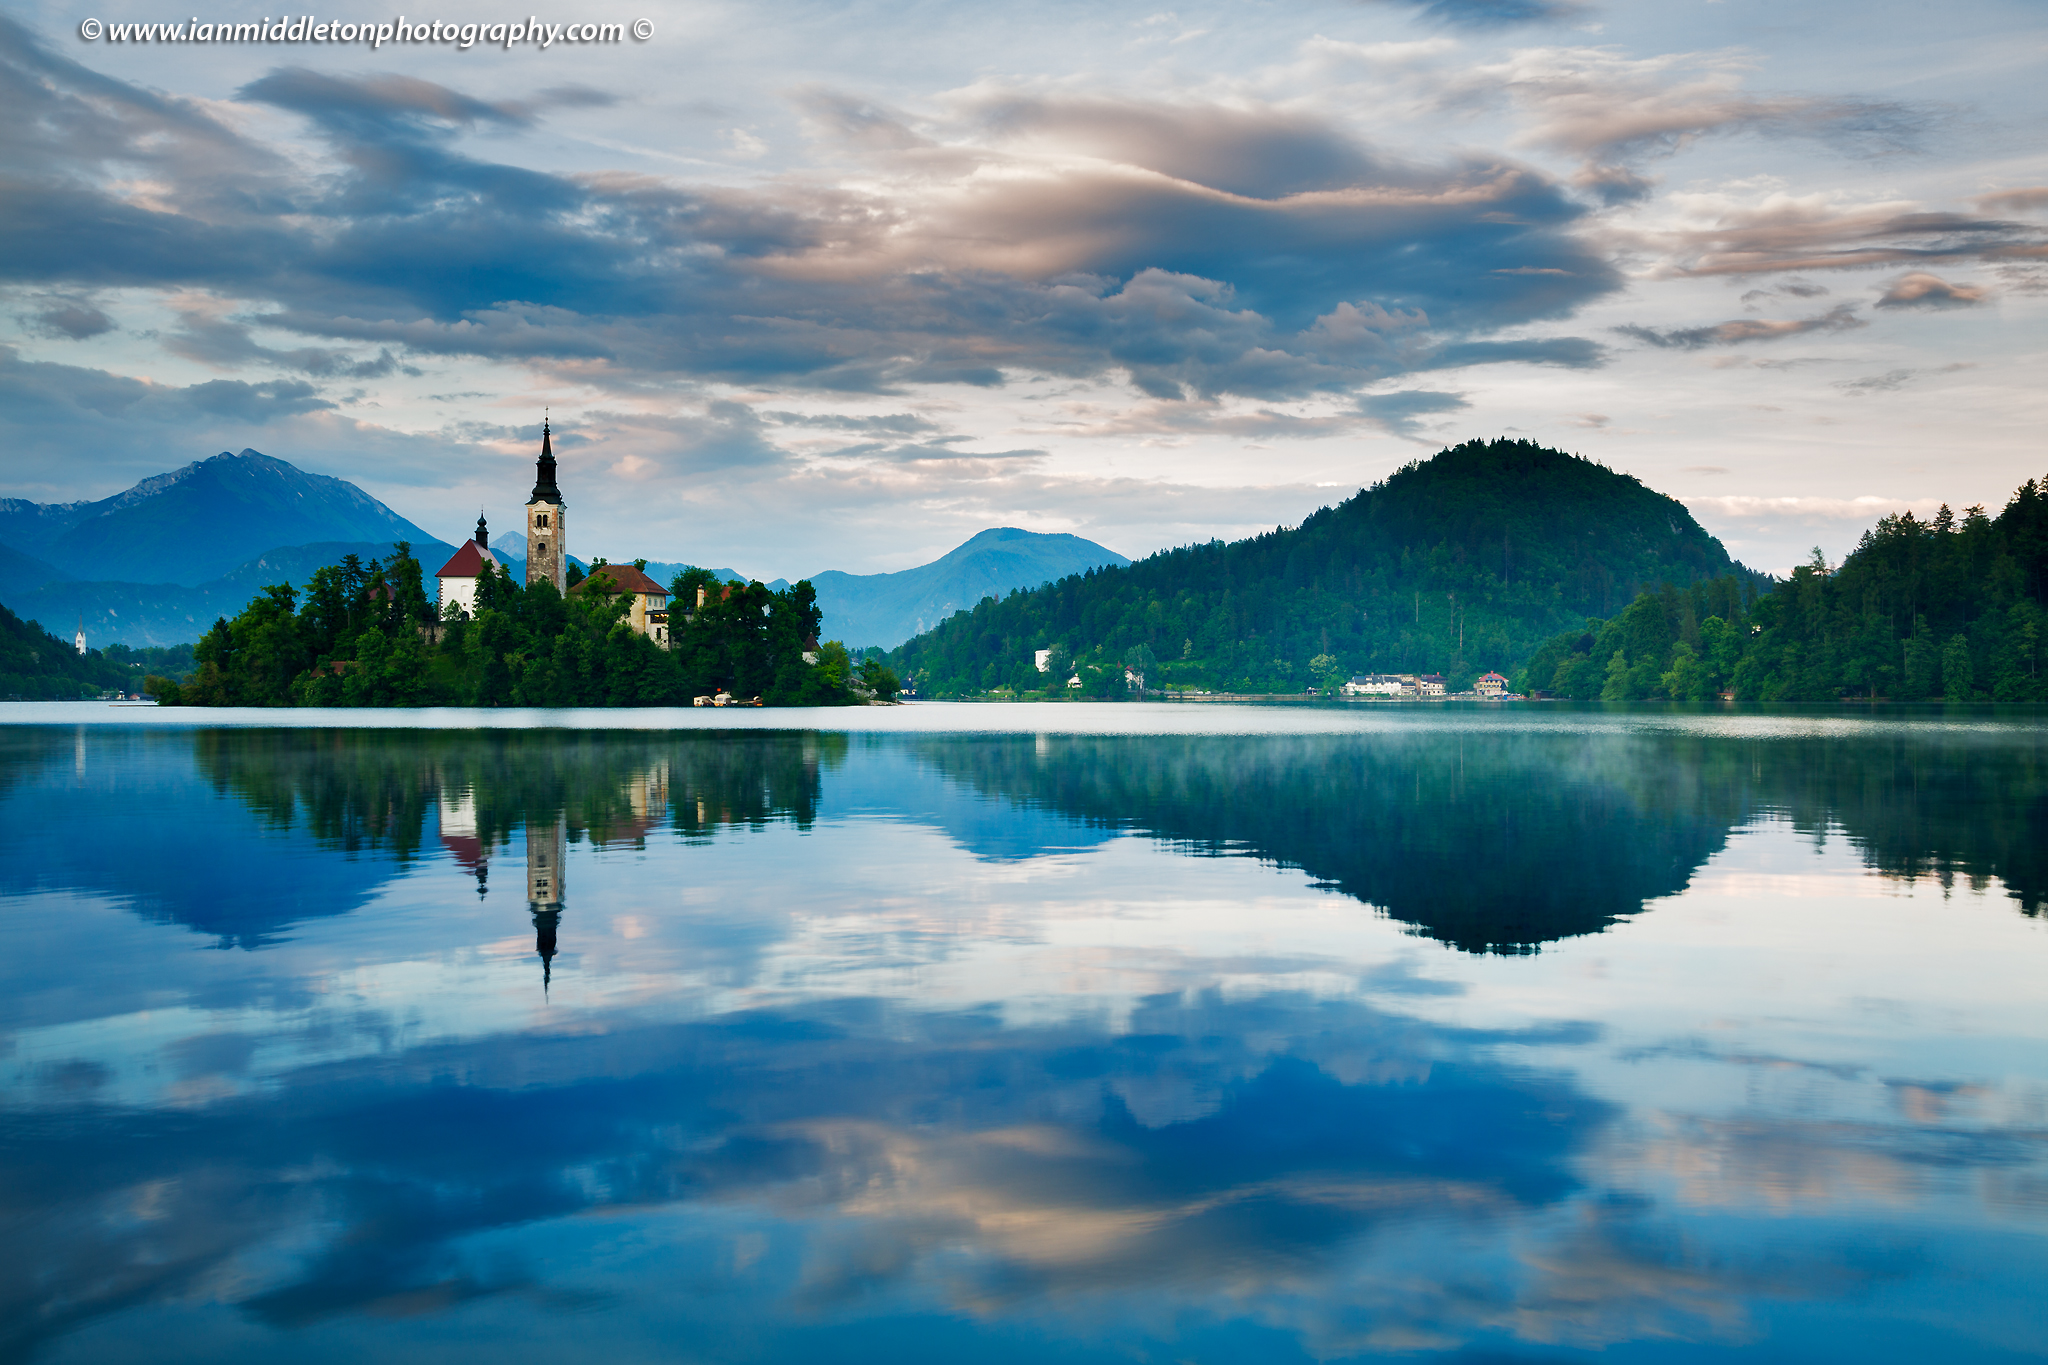 View across the beautiful Lake Bled, island church at sunset with the beautiful Karavank mountains in the background, Slovenia. Lake Bled is Slovenia's most popular tourist destination and the Karawanke mountains form the border between Slovenia and Austria.